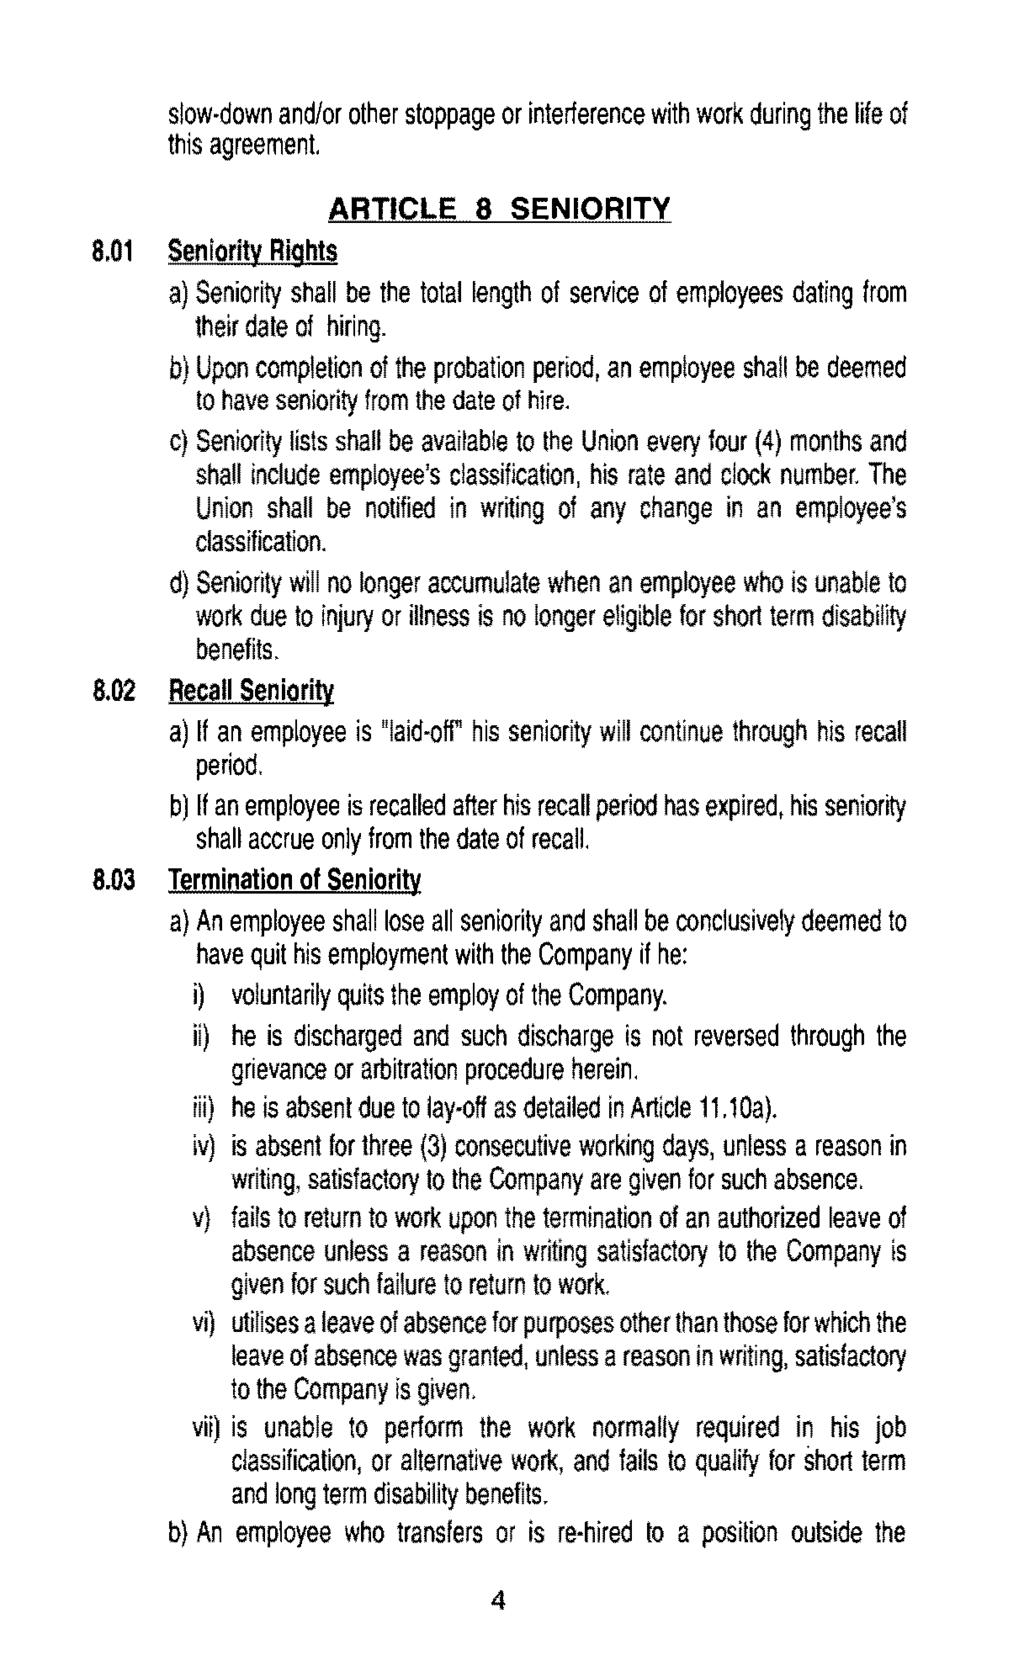 slow-down and/or other stoppage or interference with work during the life of this agreement. ARTICLE 8 SENIORITY 8.